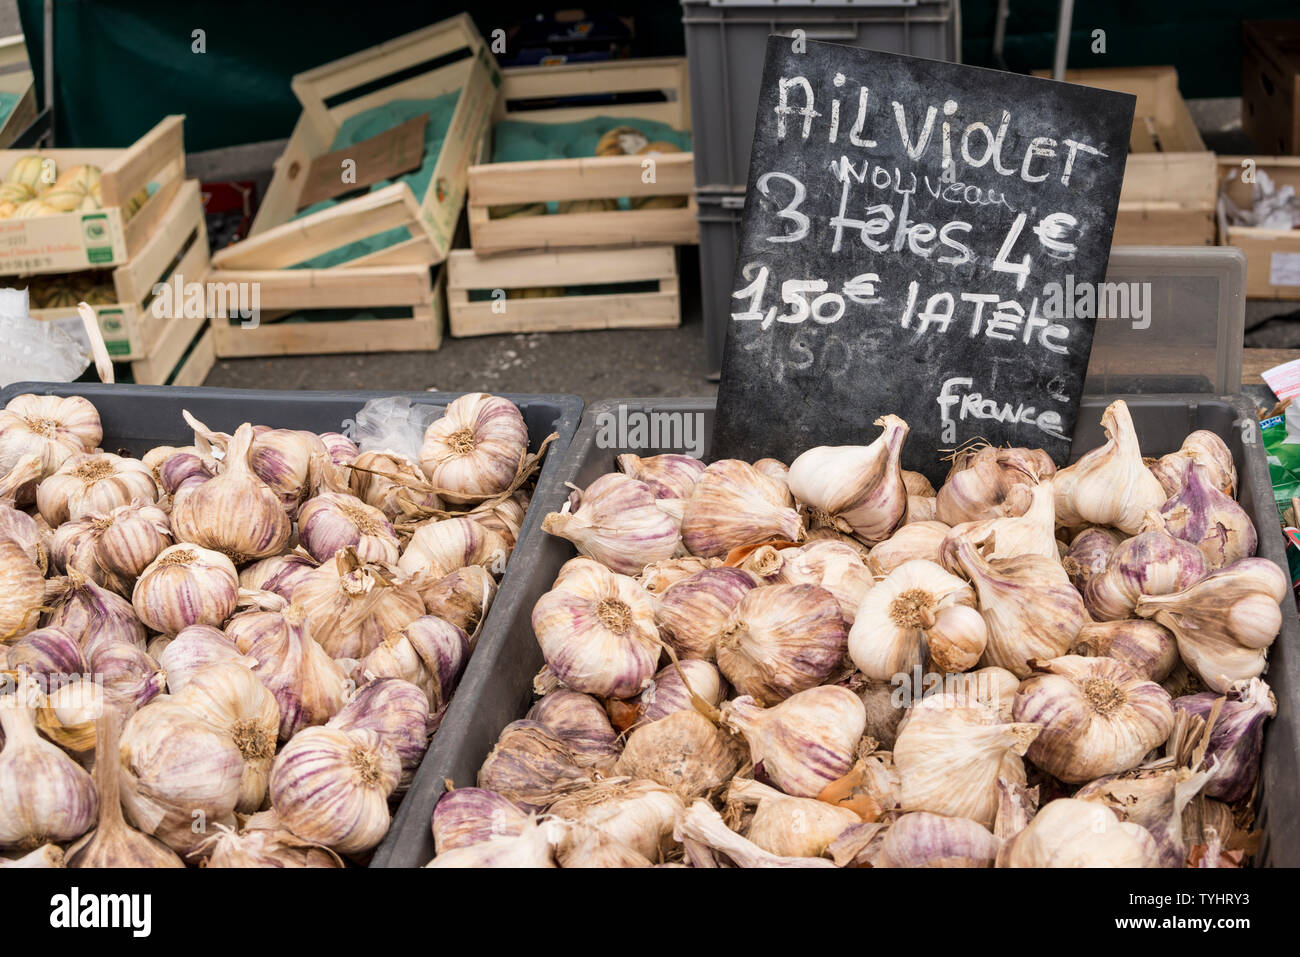 Stall selling bulbs of purple garlics in Thursday weekly market in Dinan, Brittany, France Stock Photo